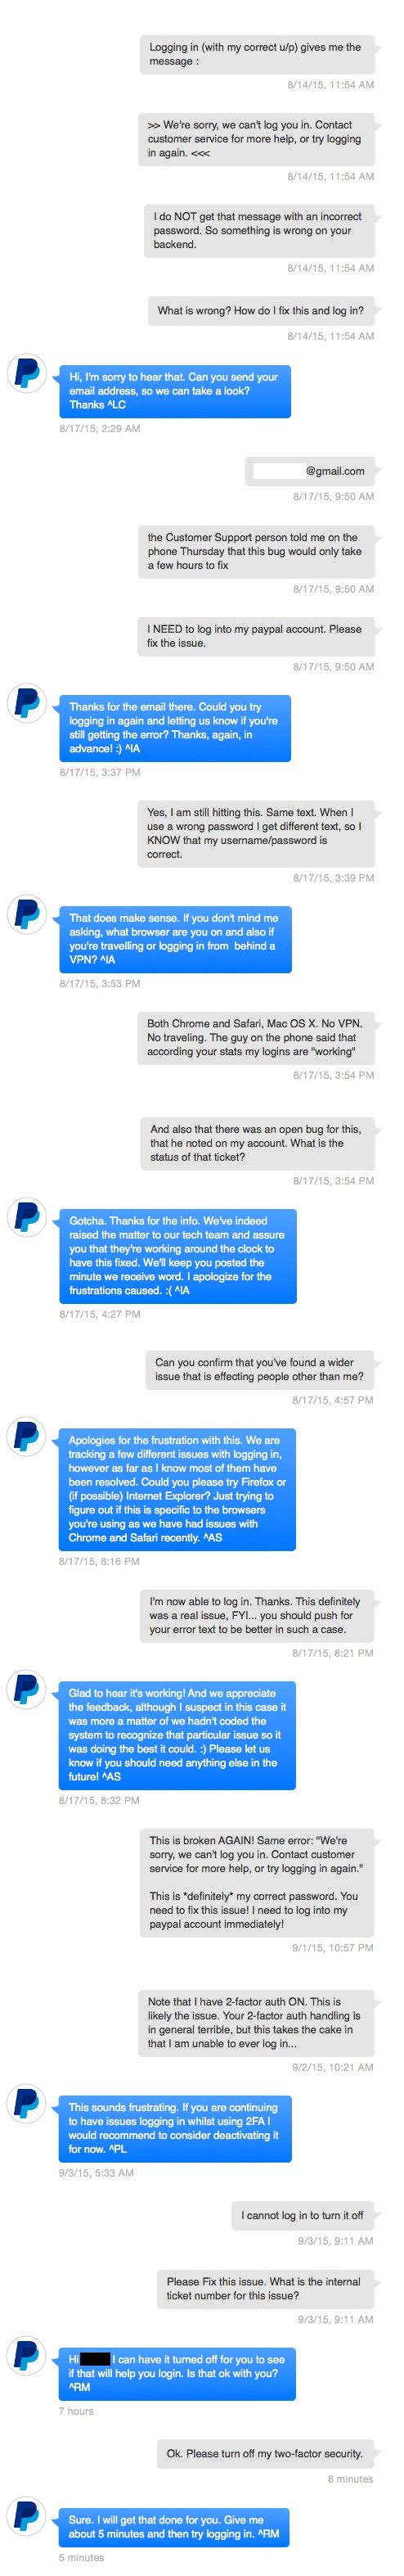 PayPal customer support conversation